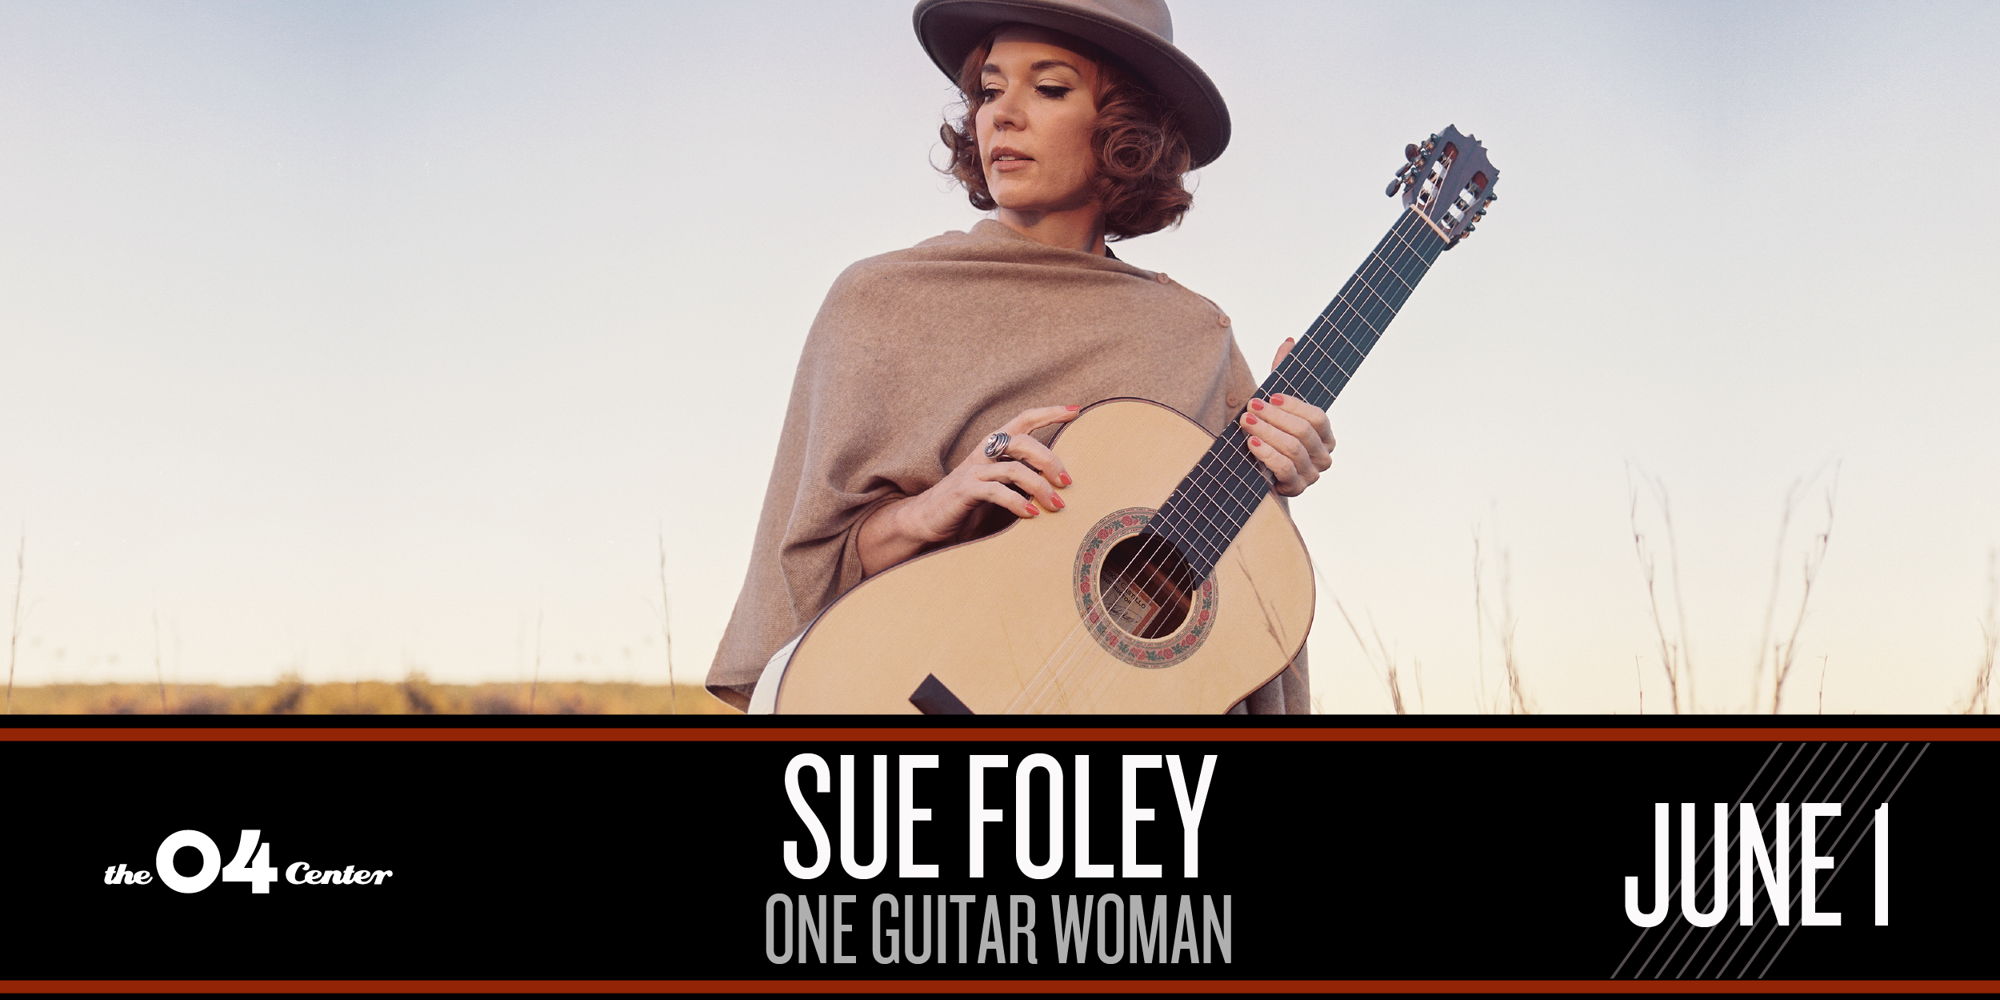  Sue Foley // One Guitar Woman promotional image